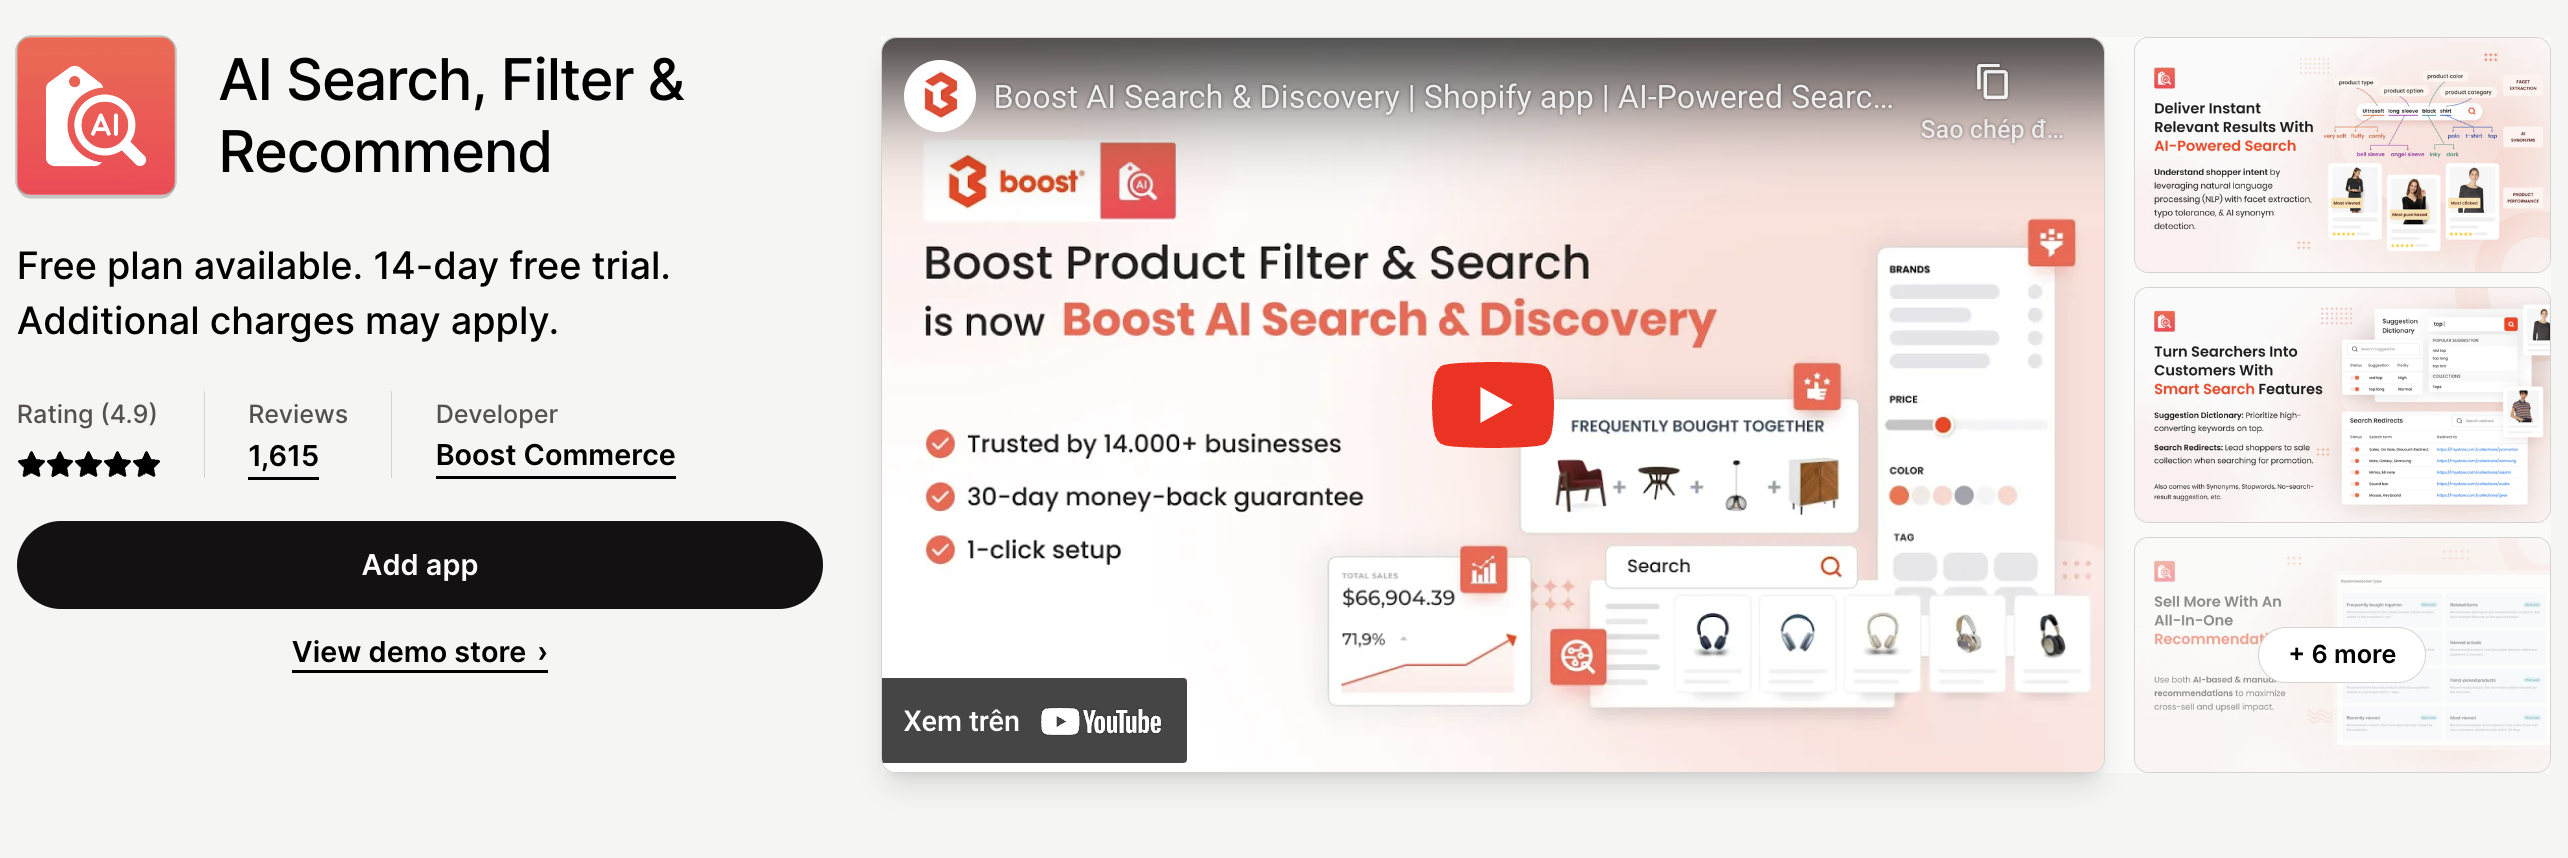 Boost AI Search & Discovery